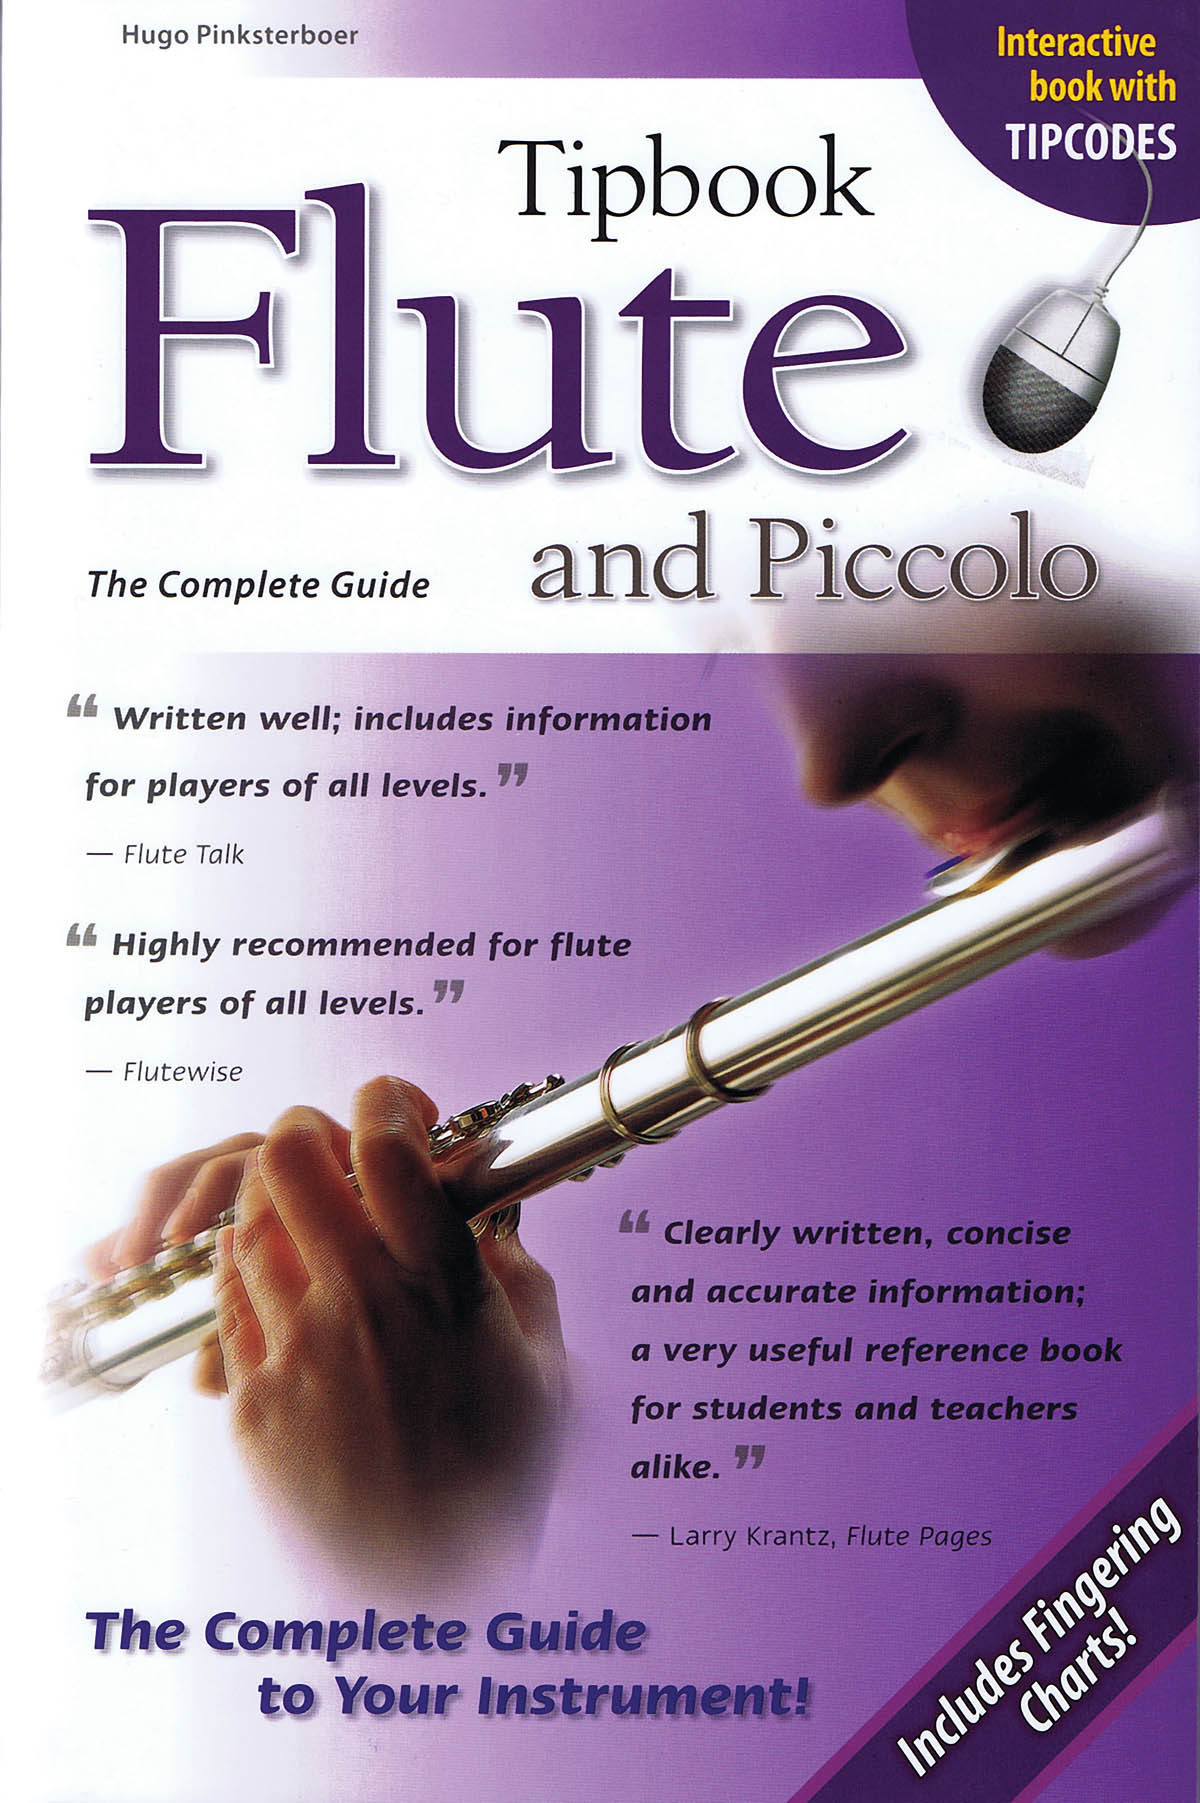 The Complete Guide: Flute And Piccolo